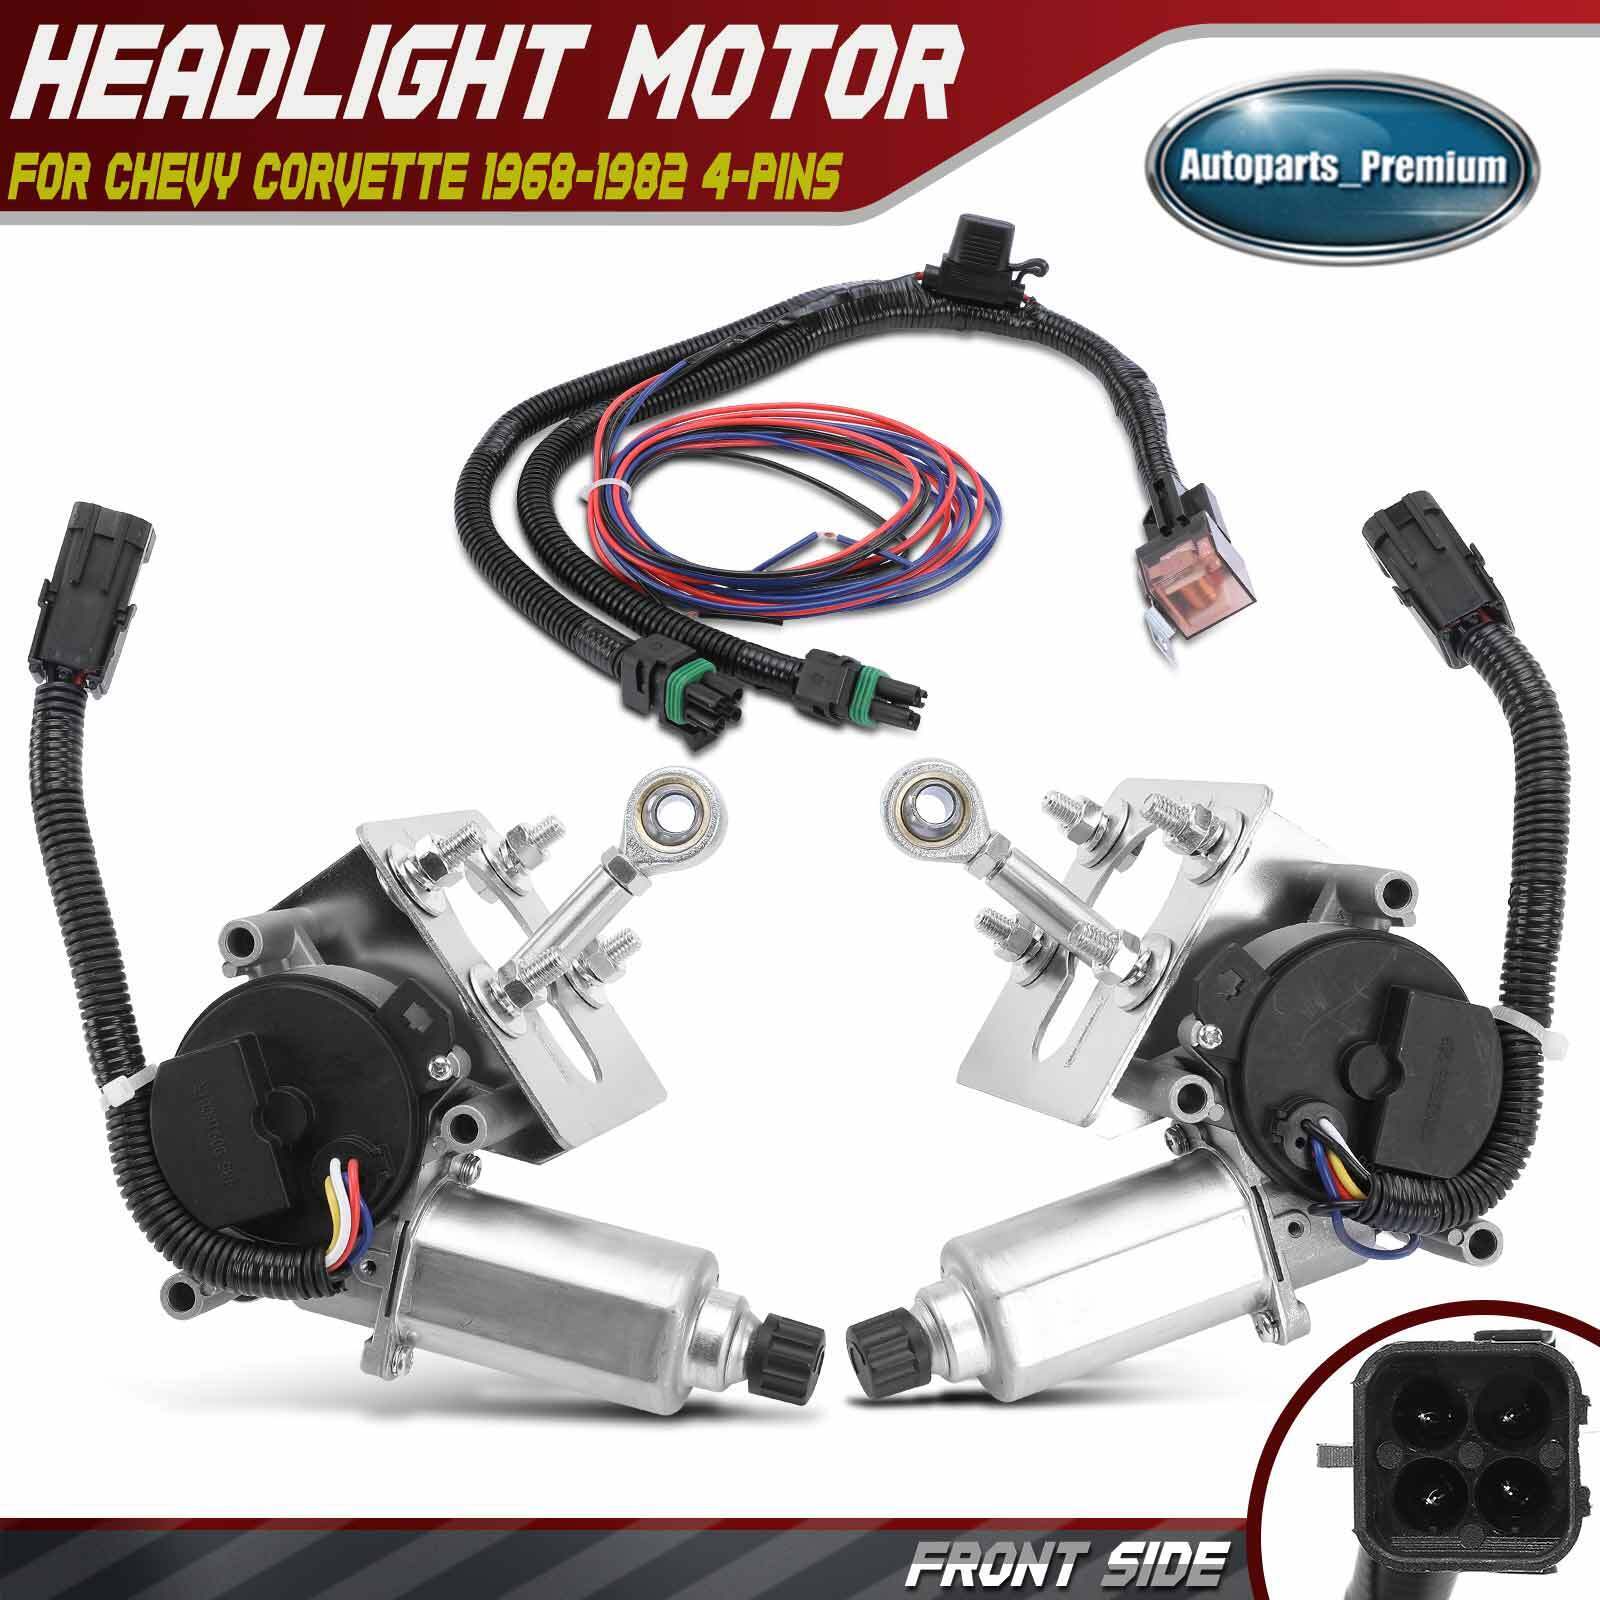 2x Front Electric Headlight Motor Conversion Kit for Chevy C3 Corvette 1968-1982